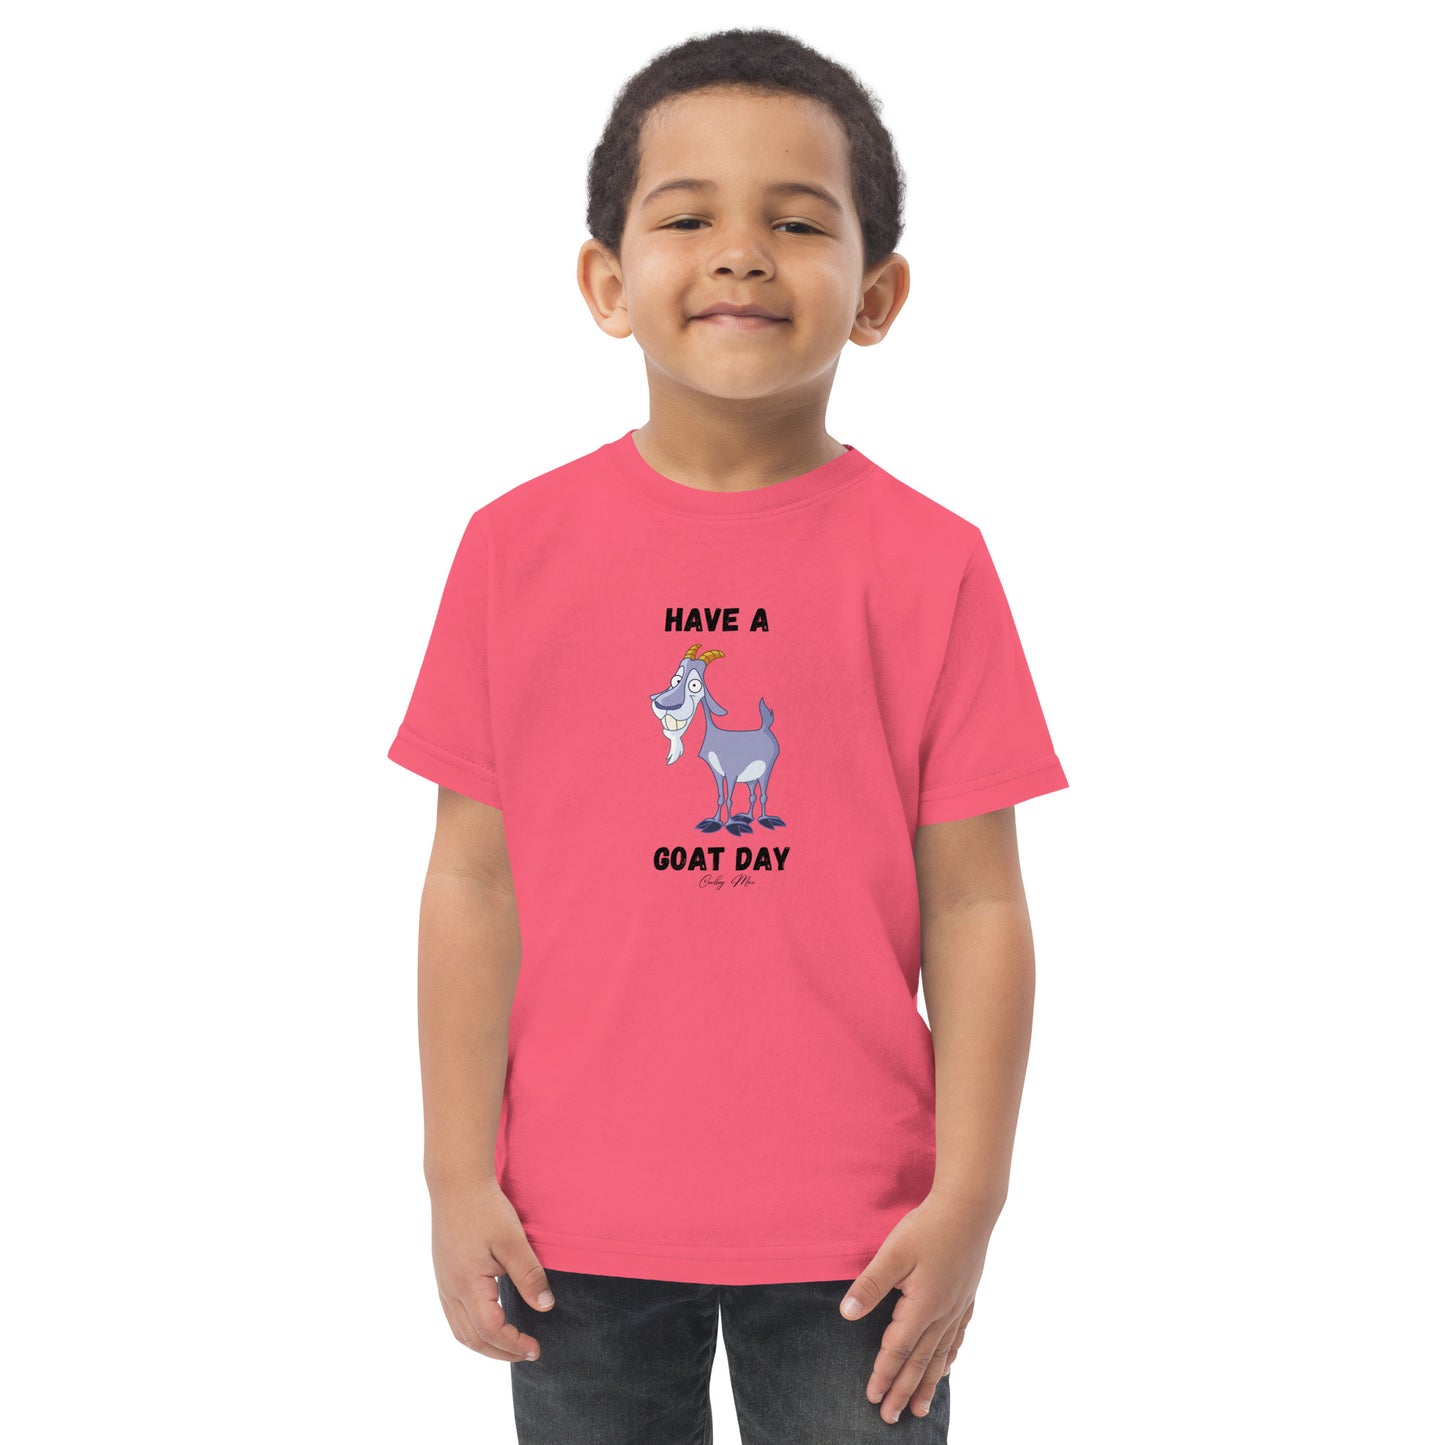 Have A GOAT Day - Bearded Goat: Toddler jersey t-shirt